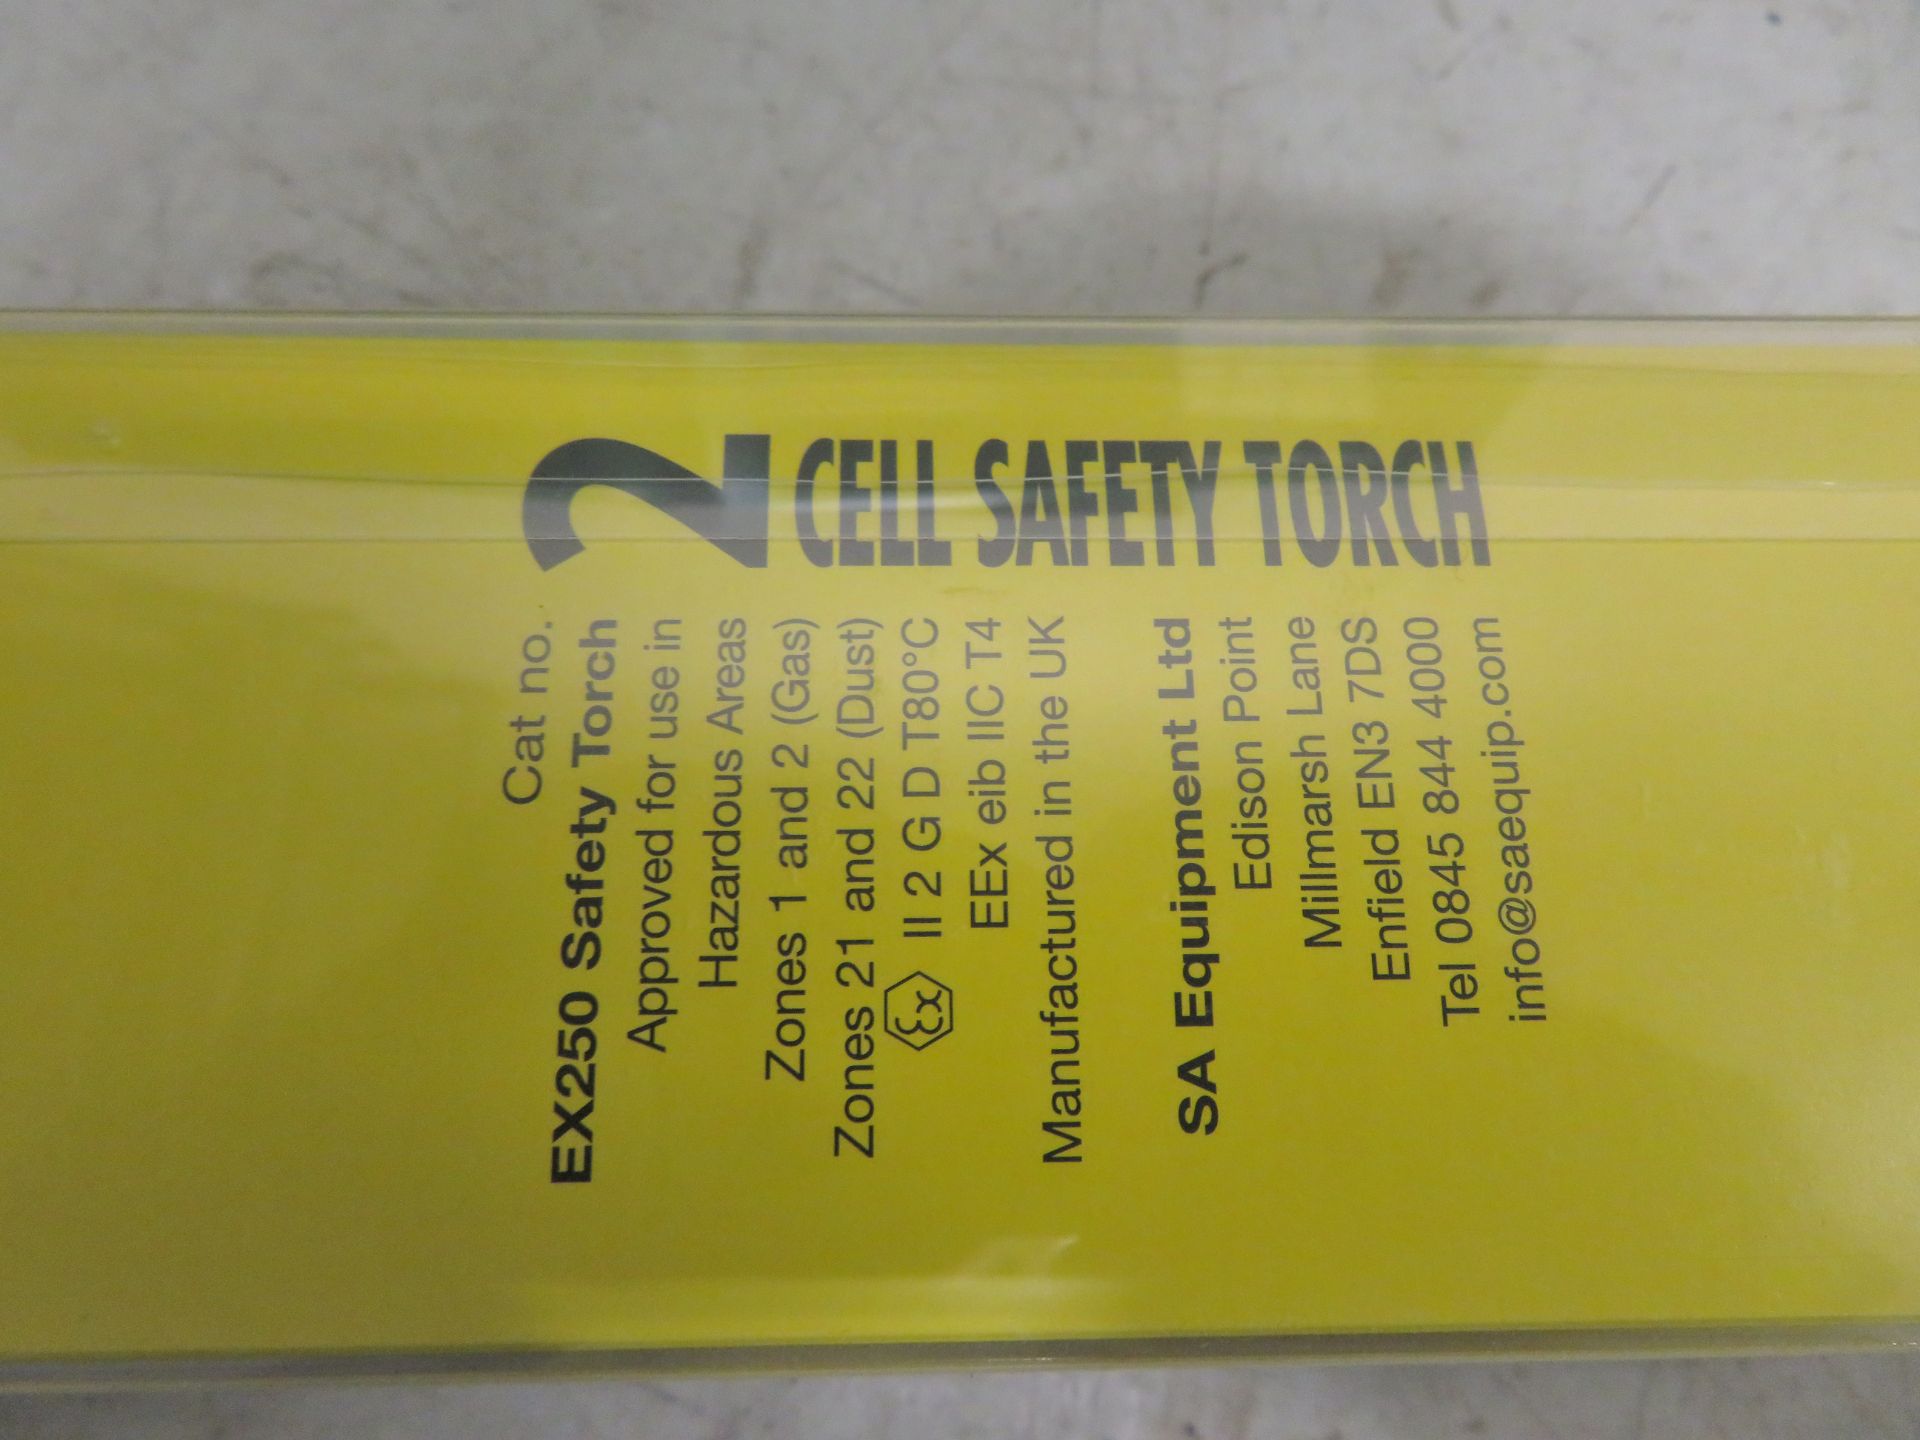 20x S A Equip Yellow 2-Cell Safety Torches - Image 3 of 3